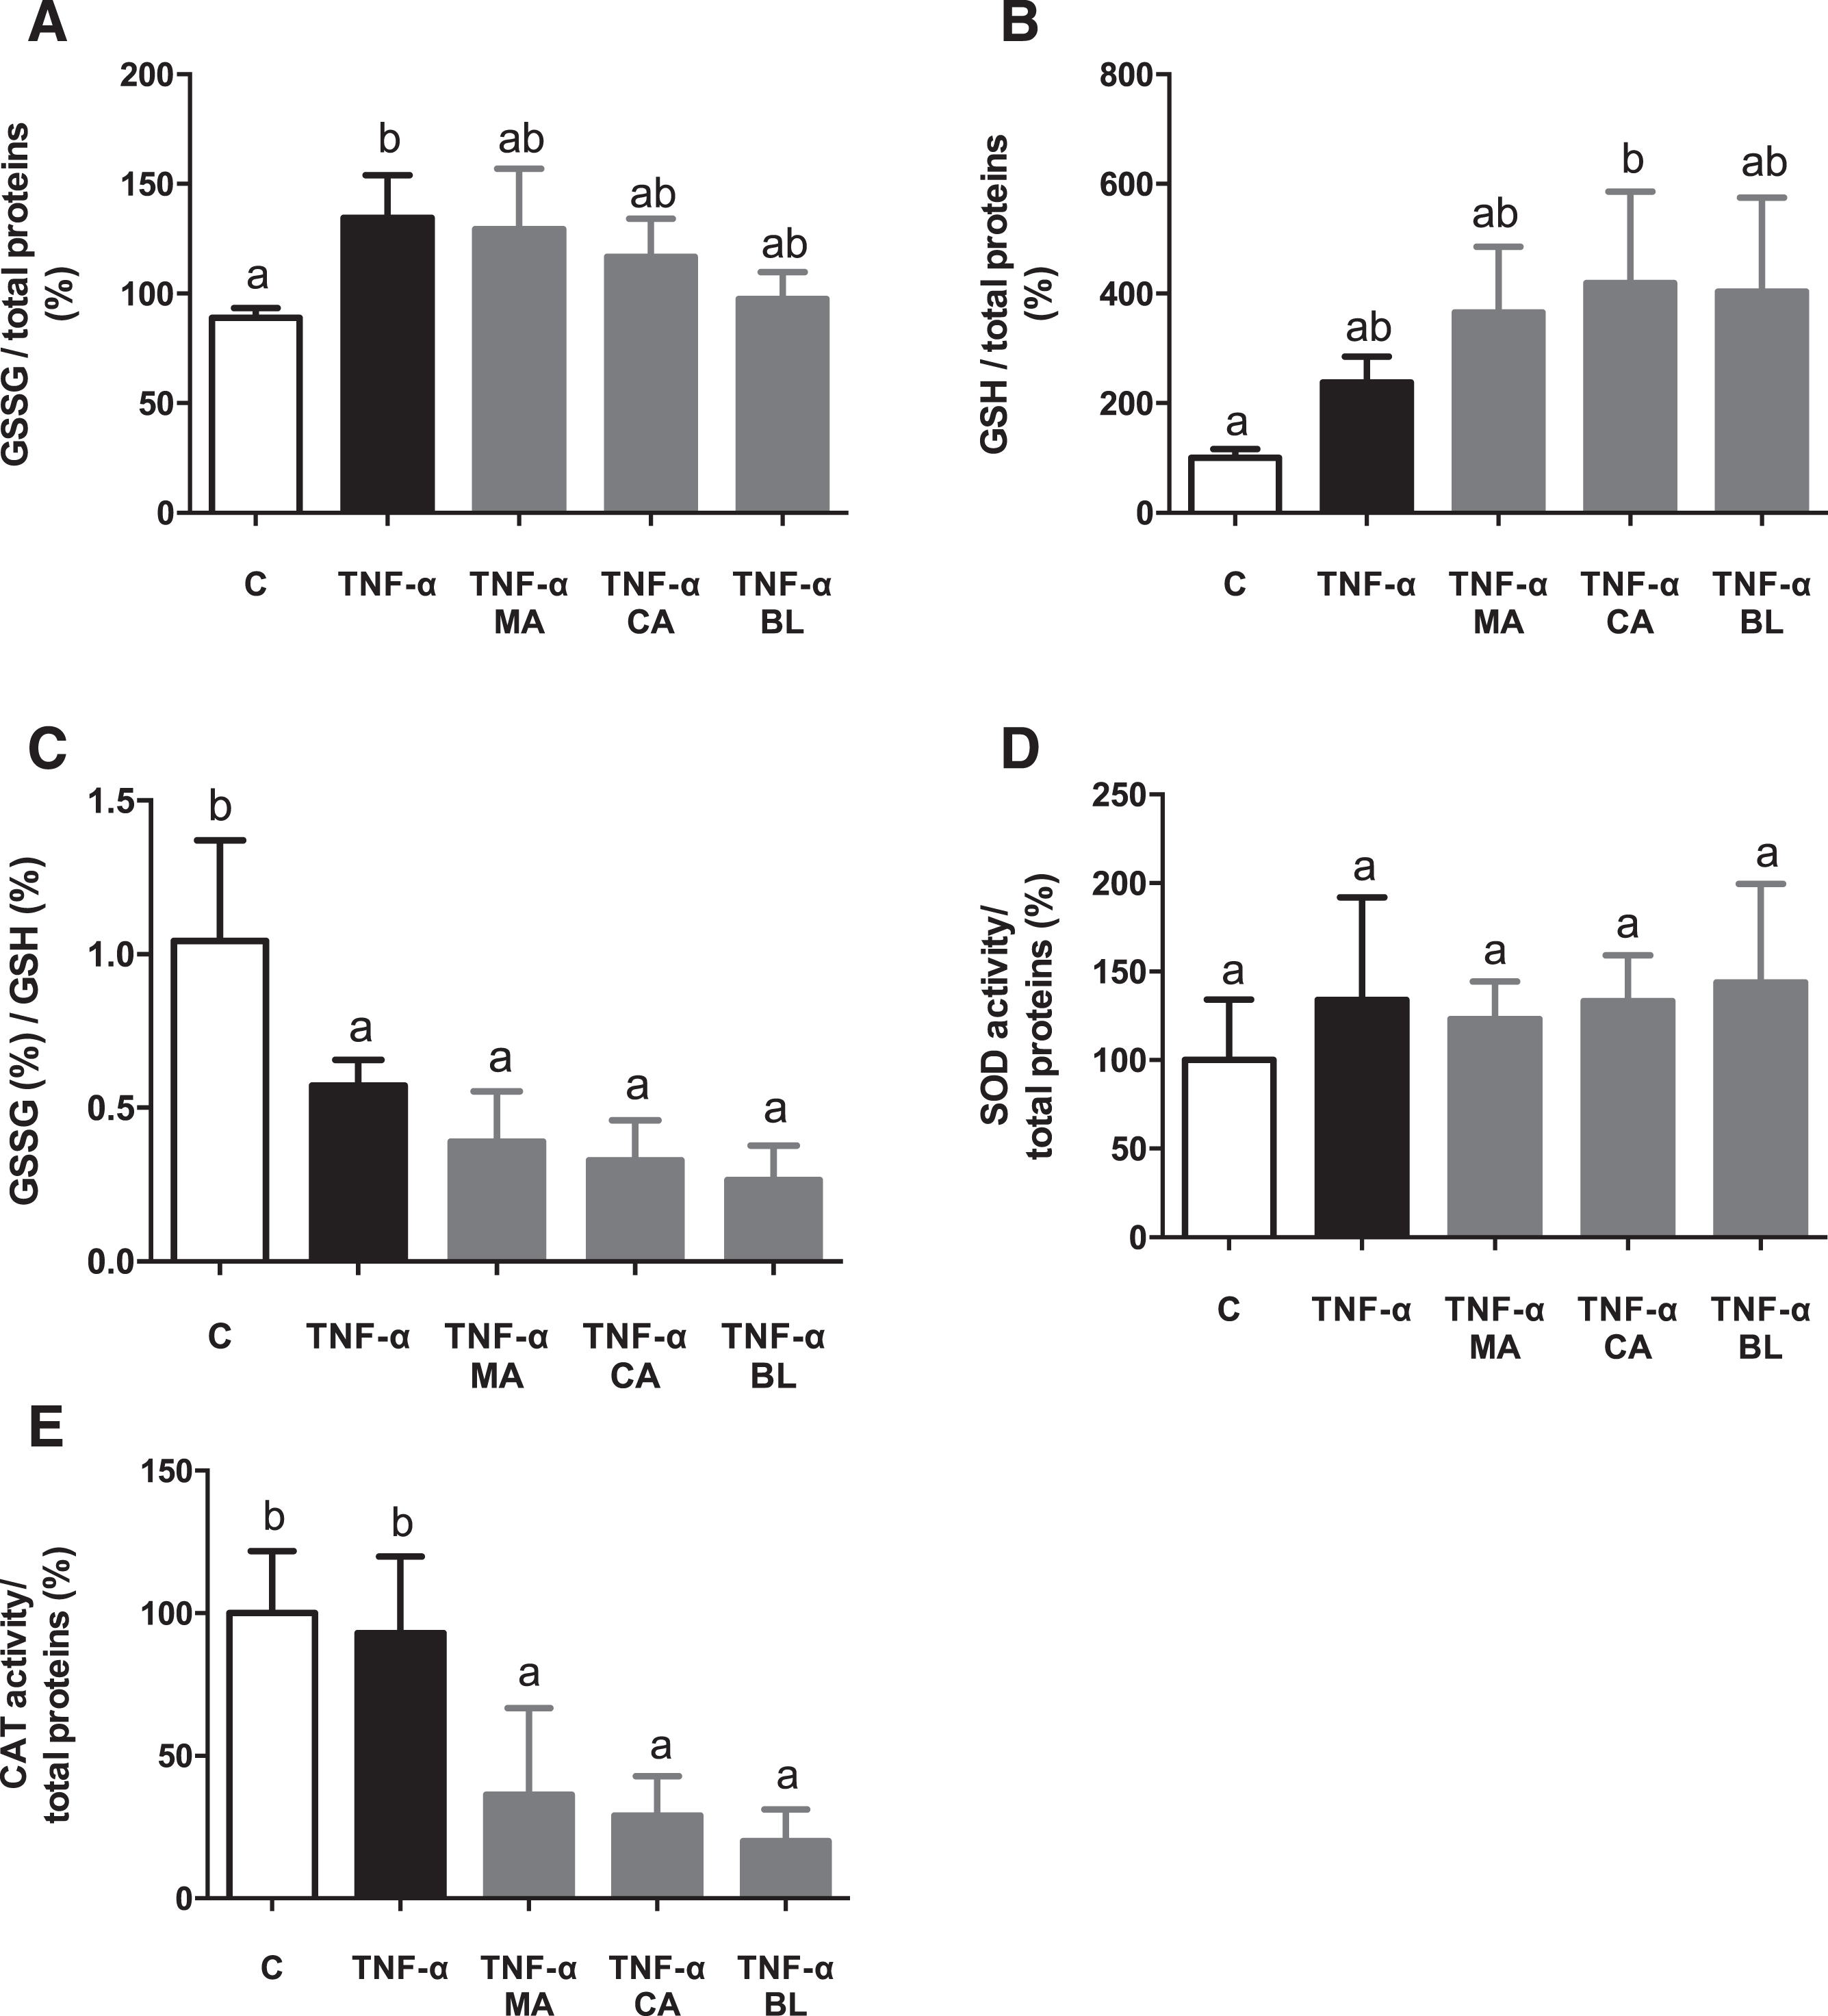 In vitro antioxidant effect of berries extracts on TNF-α activated human adipocytes. Human visceral preadipocytes were differentiated, pre-treated with 100 μM total polyphenols from each extract for 1 hour, then primed 24 hours with 4 ng/mL of TNF-α. Cells and culture media were saved for further determinations. (A) GSSG/total protein, (B) GSSG/total protein (C) GSSG/GSH ratio, (D) SOD activity/total protein, and (E) CAT activity/total protein Data (n = 3–4) were expressed as mean±SD and analyzed with one-way ANOVA followed by Tukey posthoc tests. GSSG, oxidized glutathione; GSH, reduced glutathione; SOD, superoxide dismutase; CAT, catalase; C, control; MA, Maqui; CA, Calafate; BL, Blueberry. Different letters showed a statistical significance of at least p < 0.05.